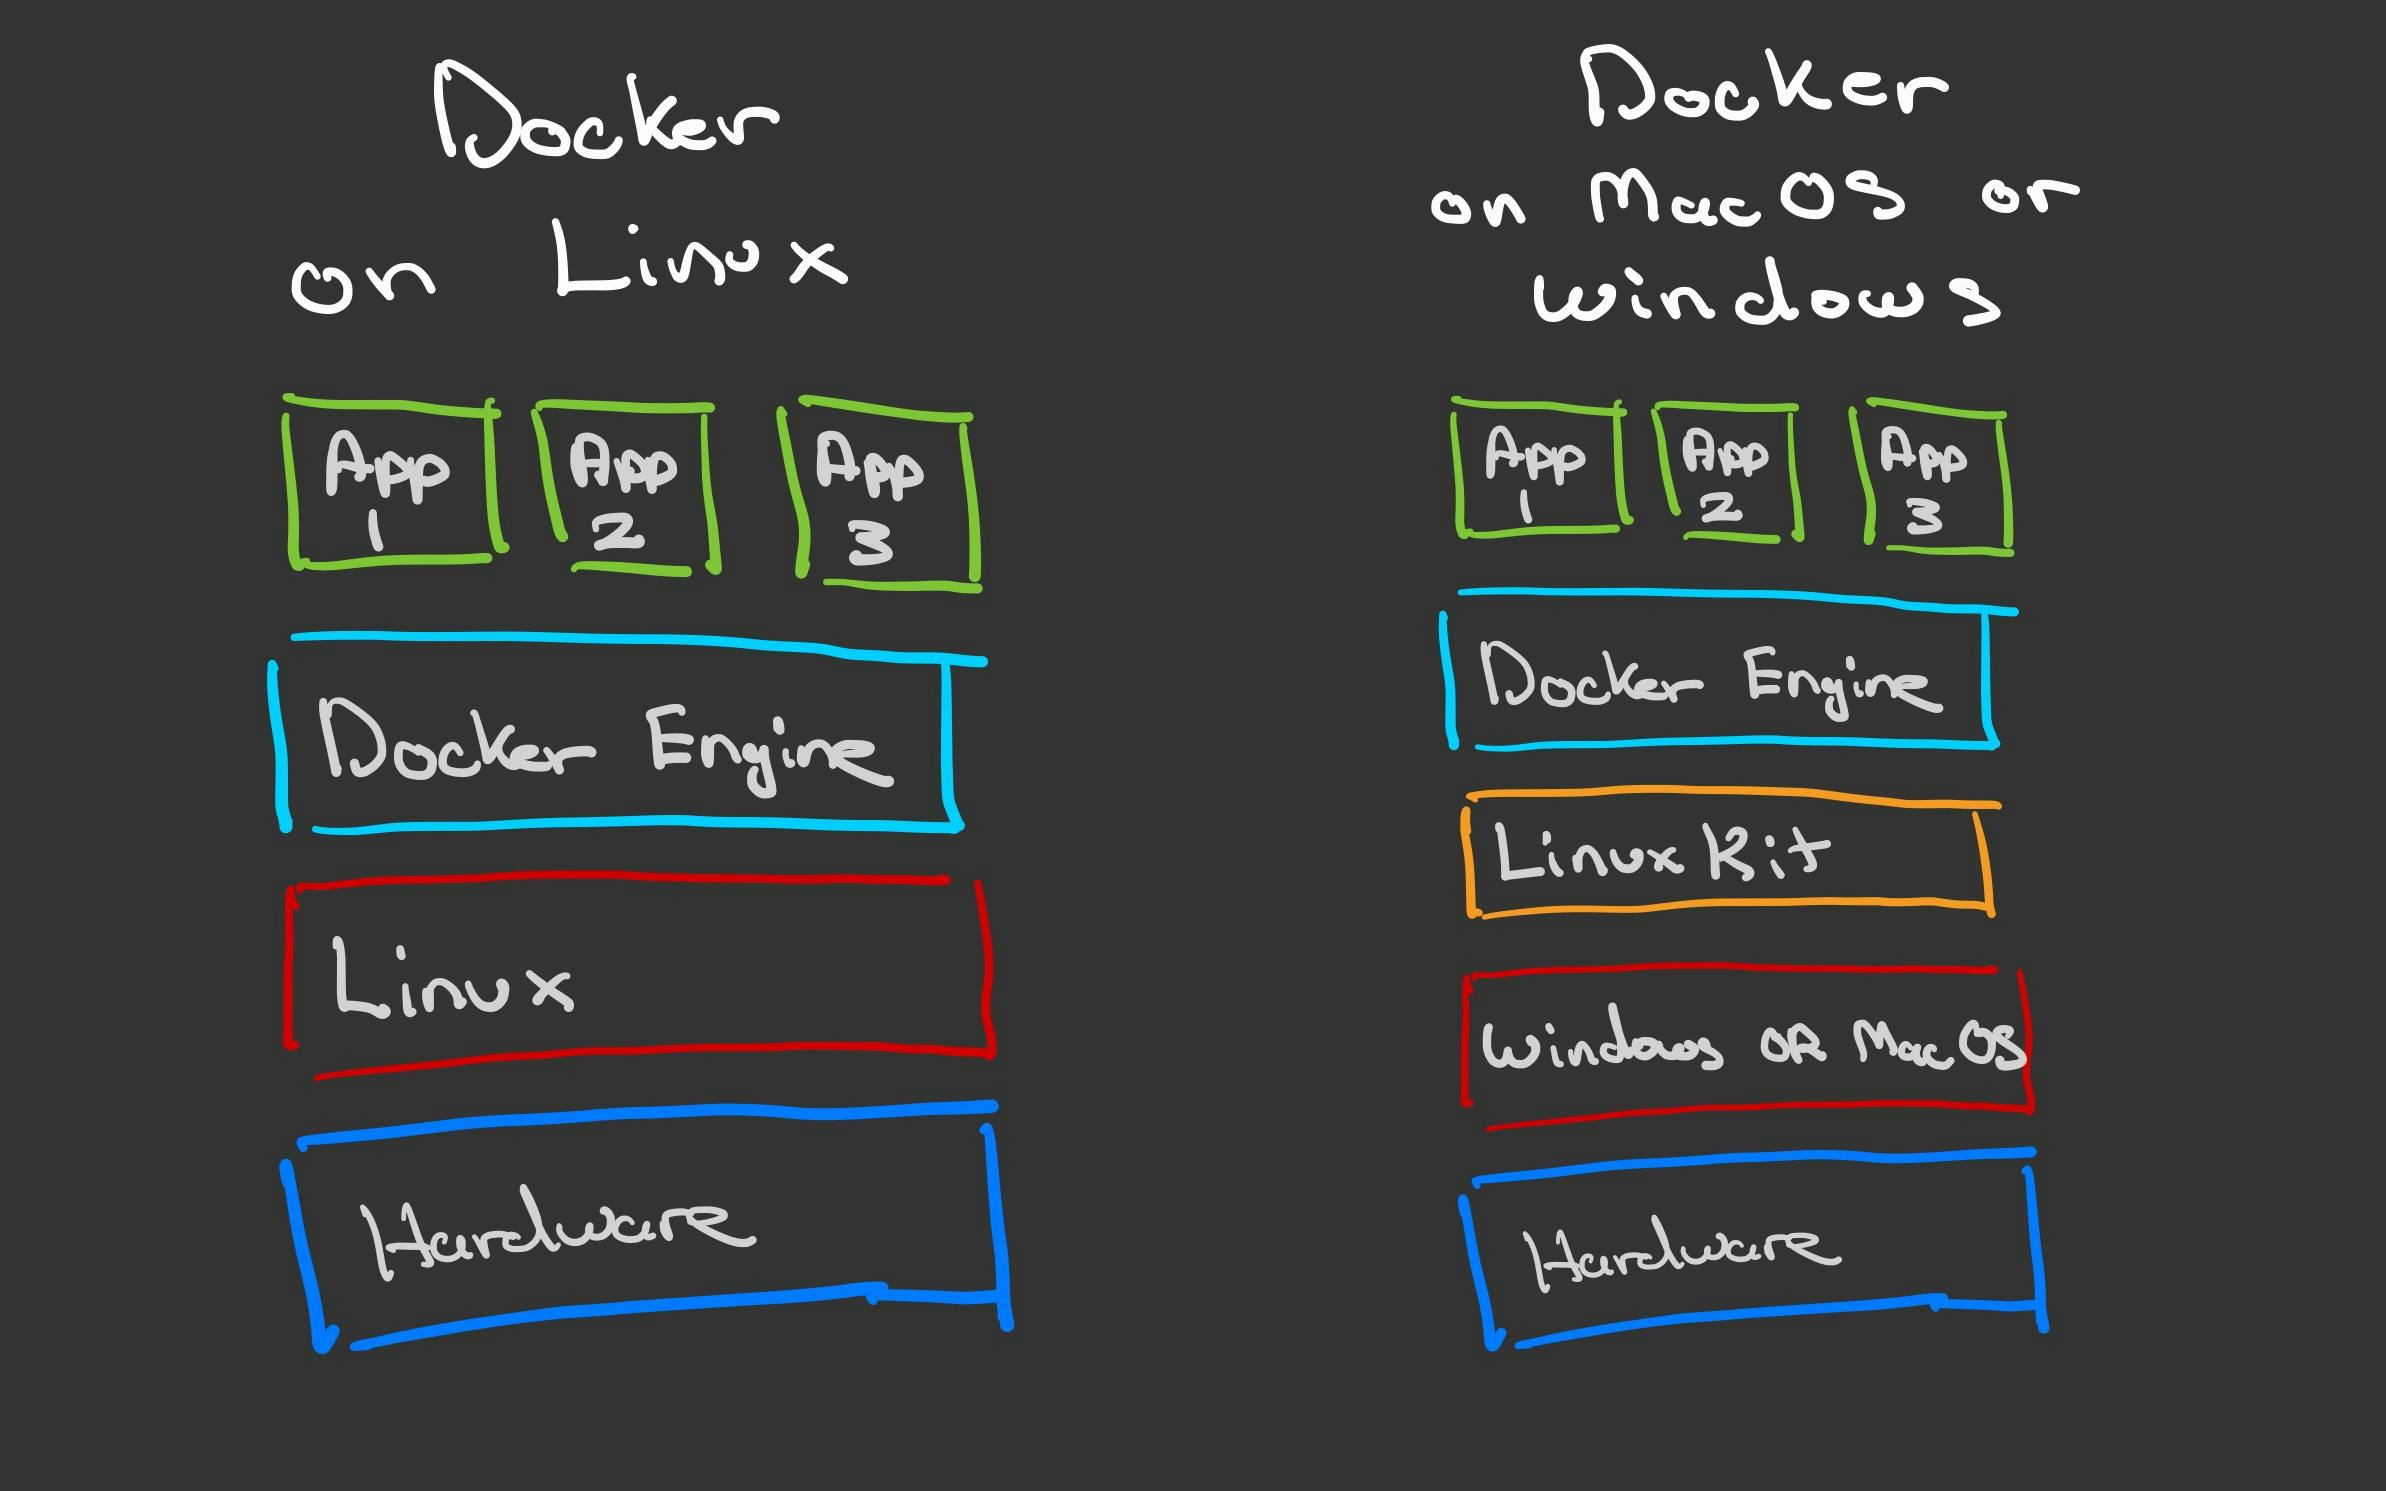 Docker hardware and software breakdown on Linux, Mac OS, and Windows OS